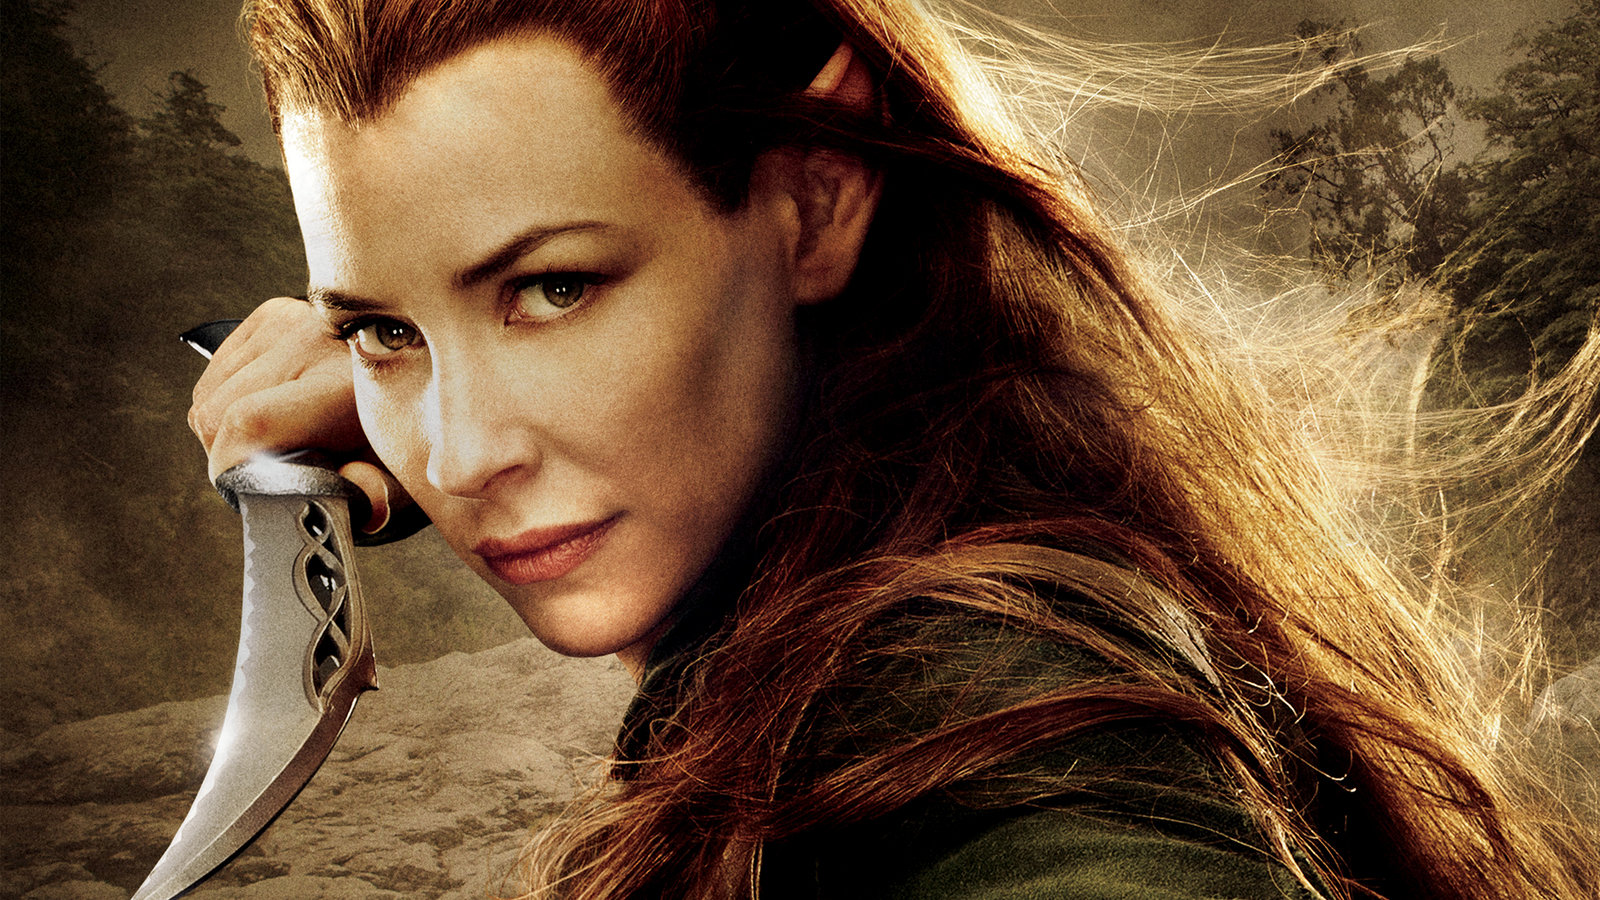 the, Desolation, Of, Smaug, Tauriel, Fantasy, Warrior, Girl, Lotr, Lord, Rings Wallpaper